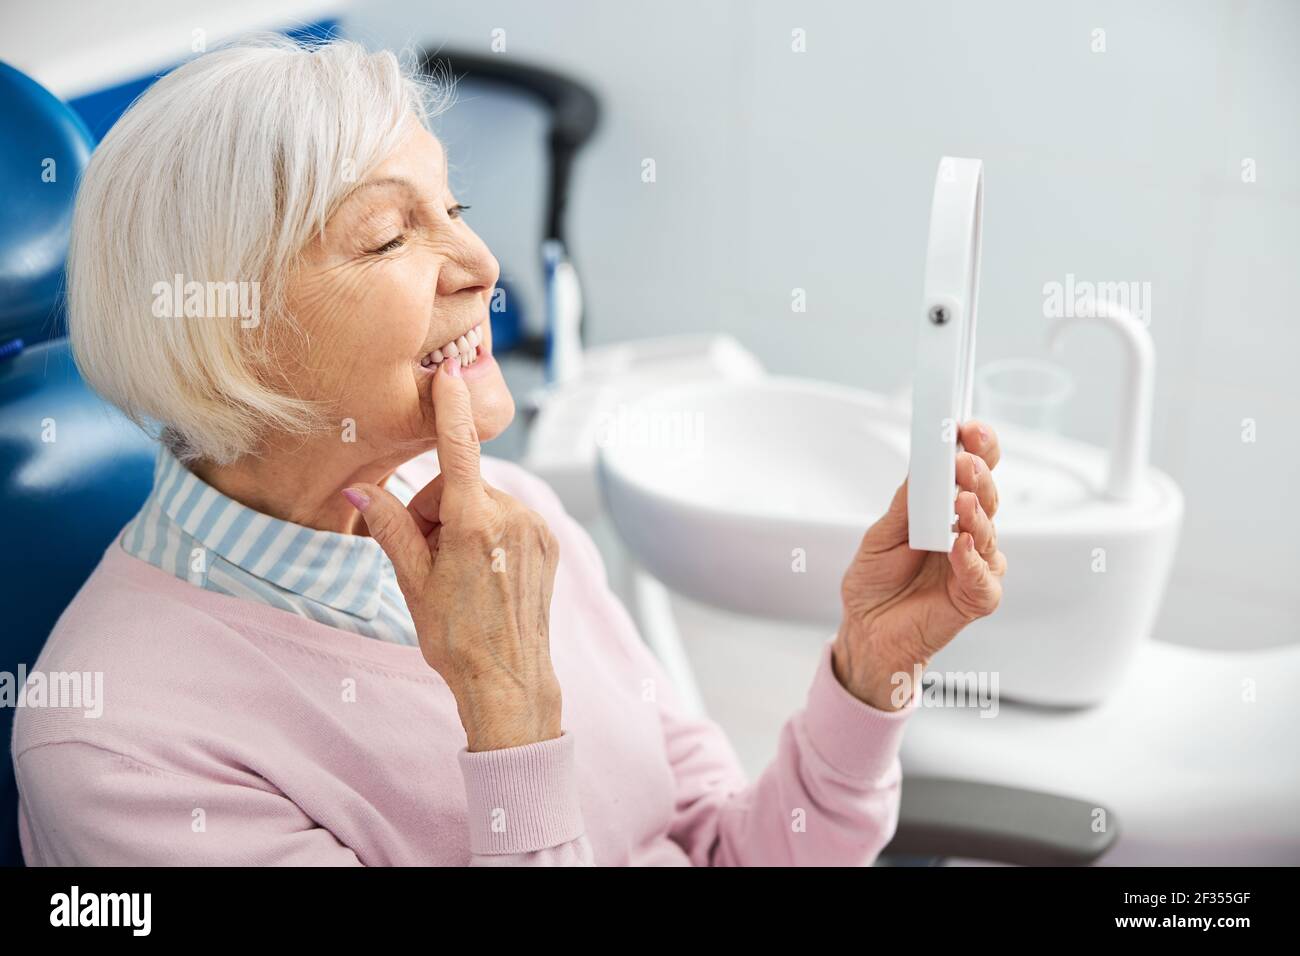 Elderly person with mirror pushing her tooth with finger Stock Photo